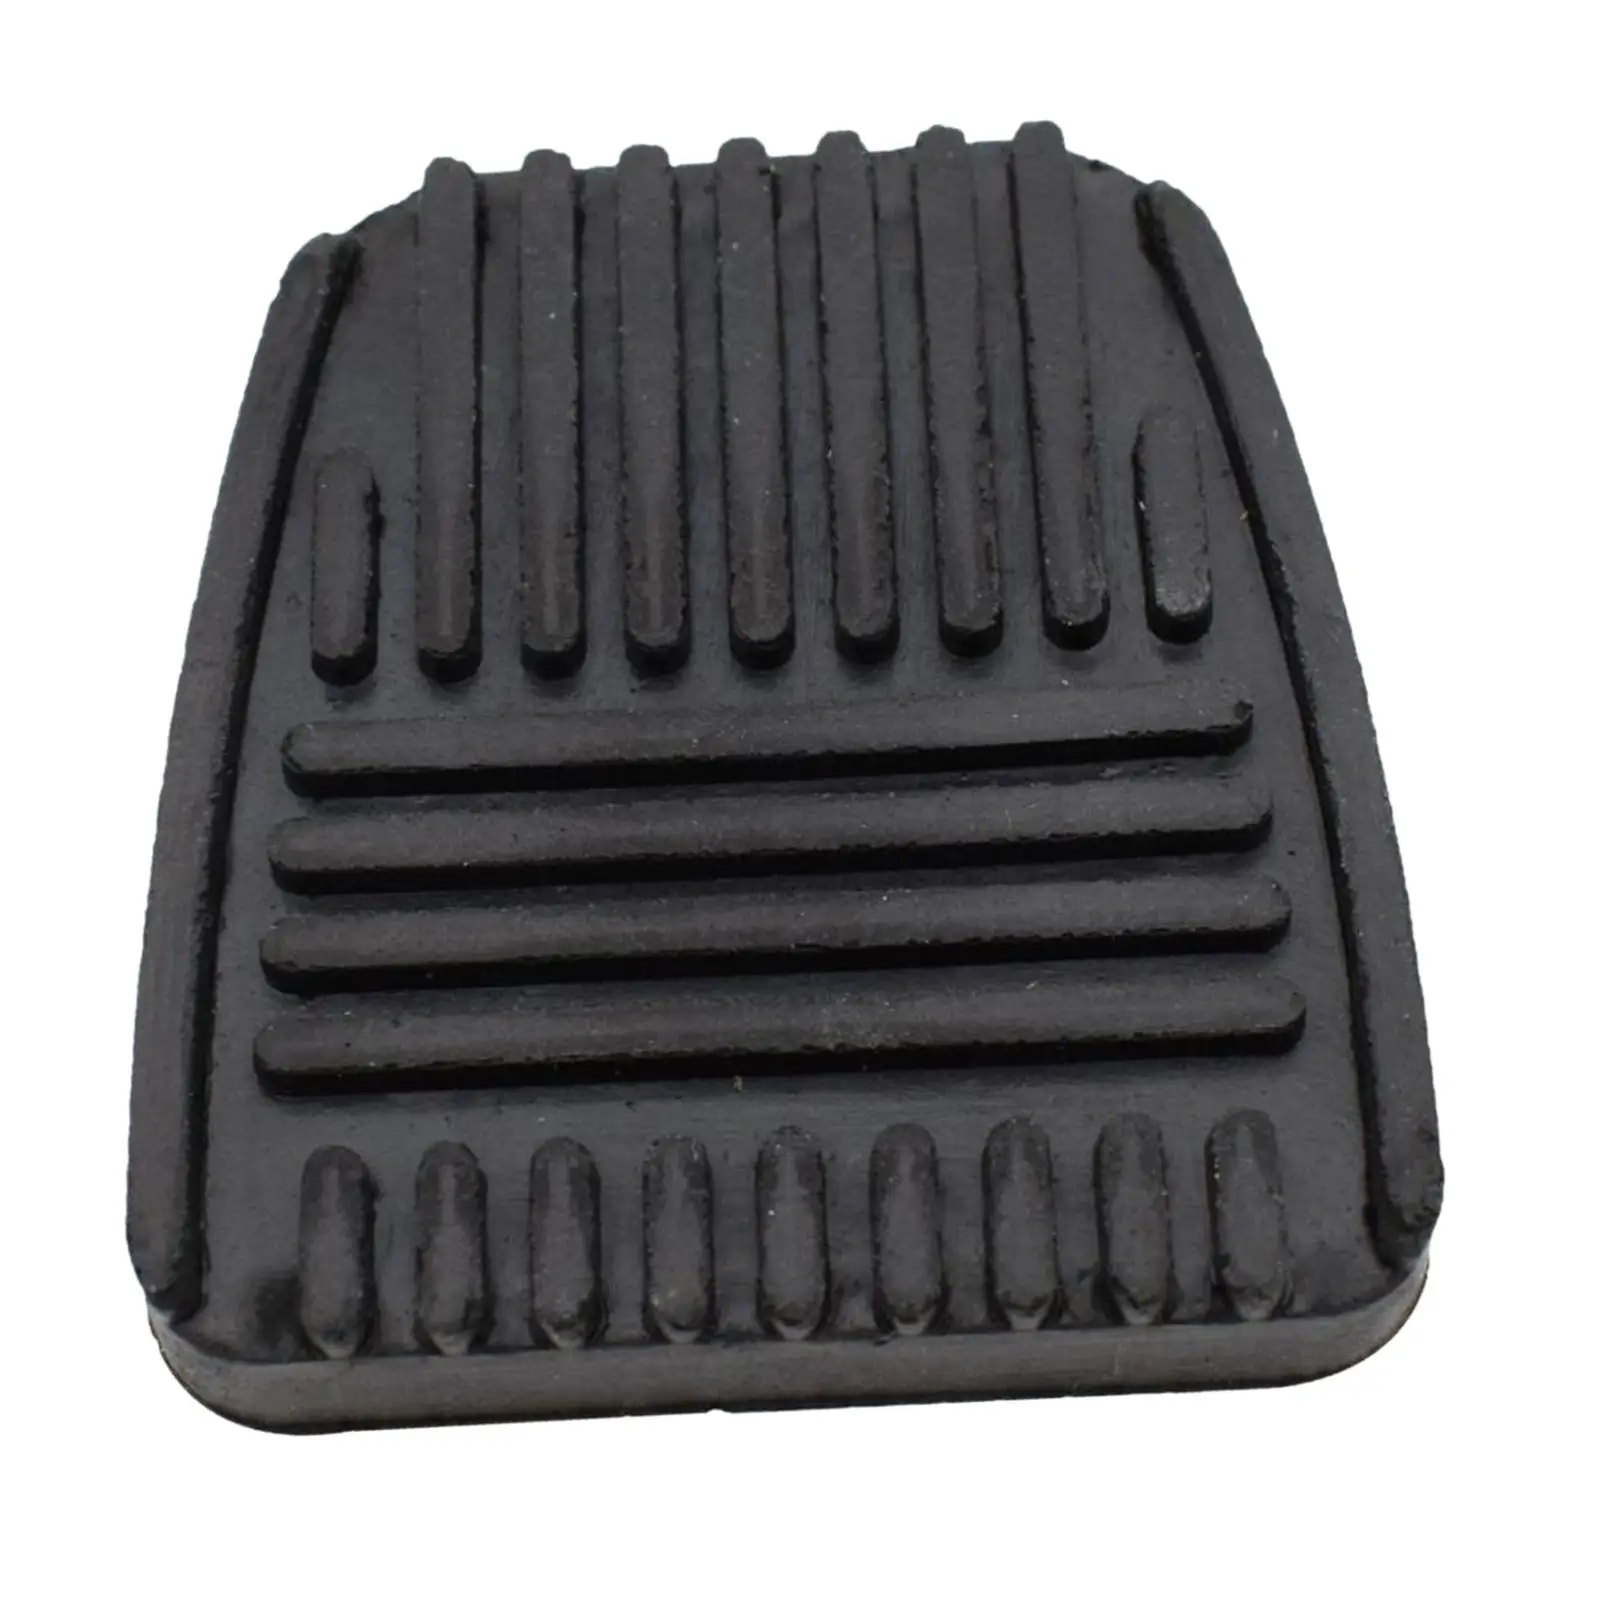 Brake Pedal Rubber Pad 31321-14020 Black Auto Accessory Brake Pedal Pad Replacement for Tercel